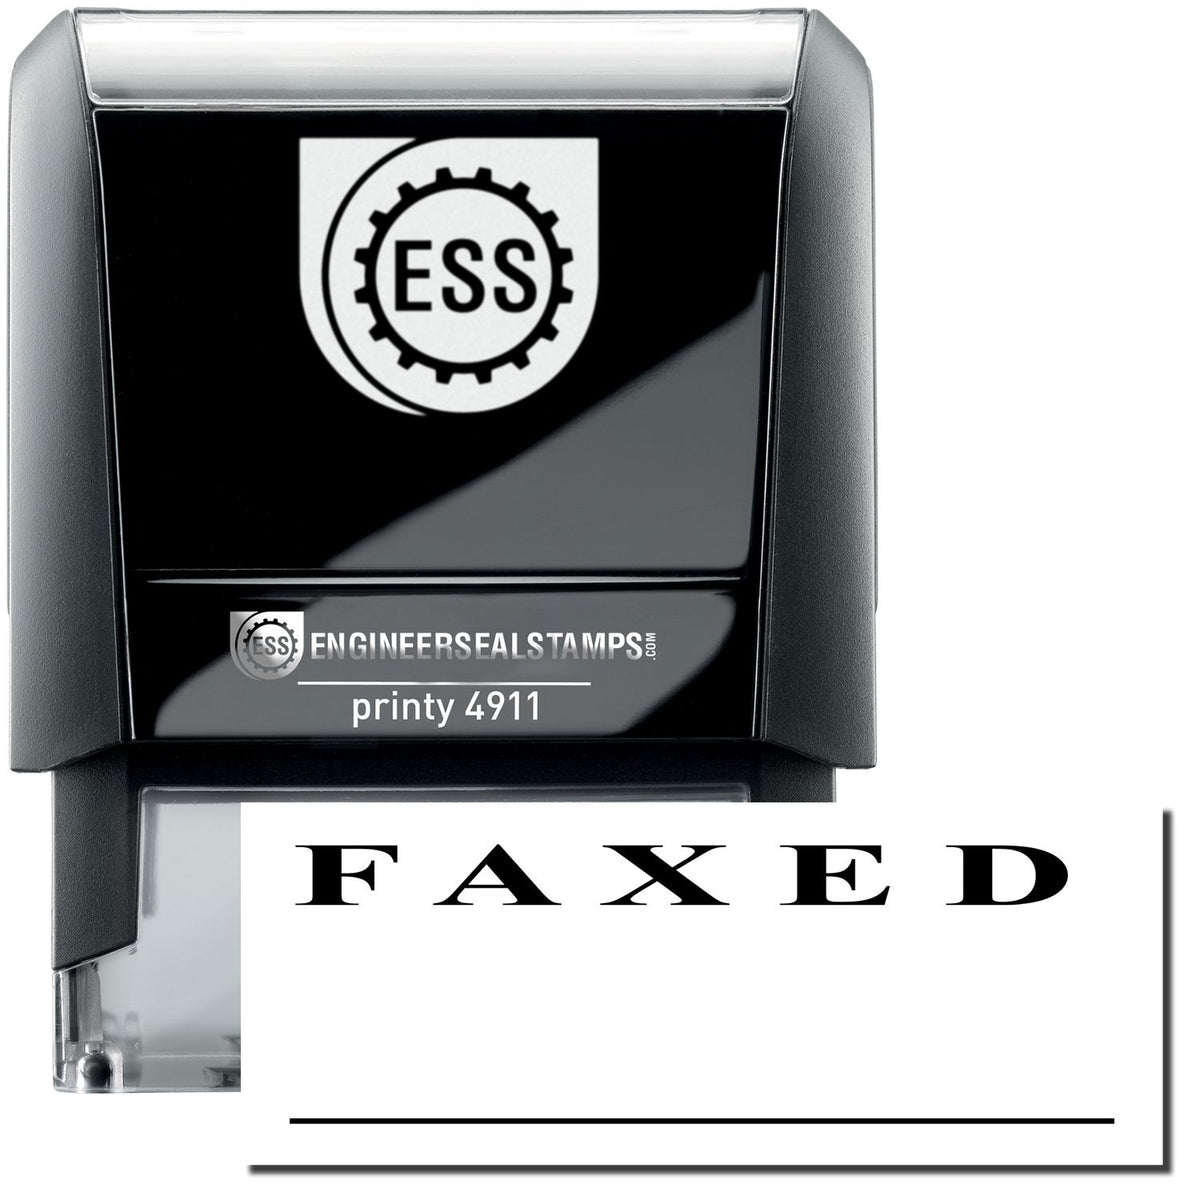 A self-inking stamp with a stamped image showing how the text &quot;FAXED&quot; with a line under it is displayed after stamping.